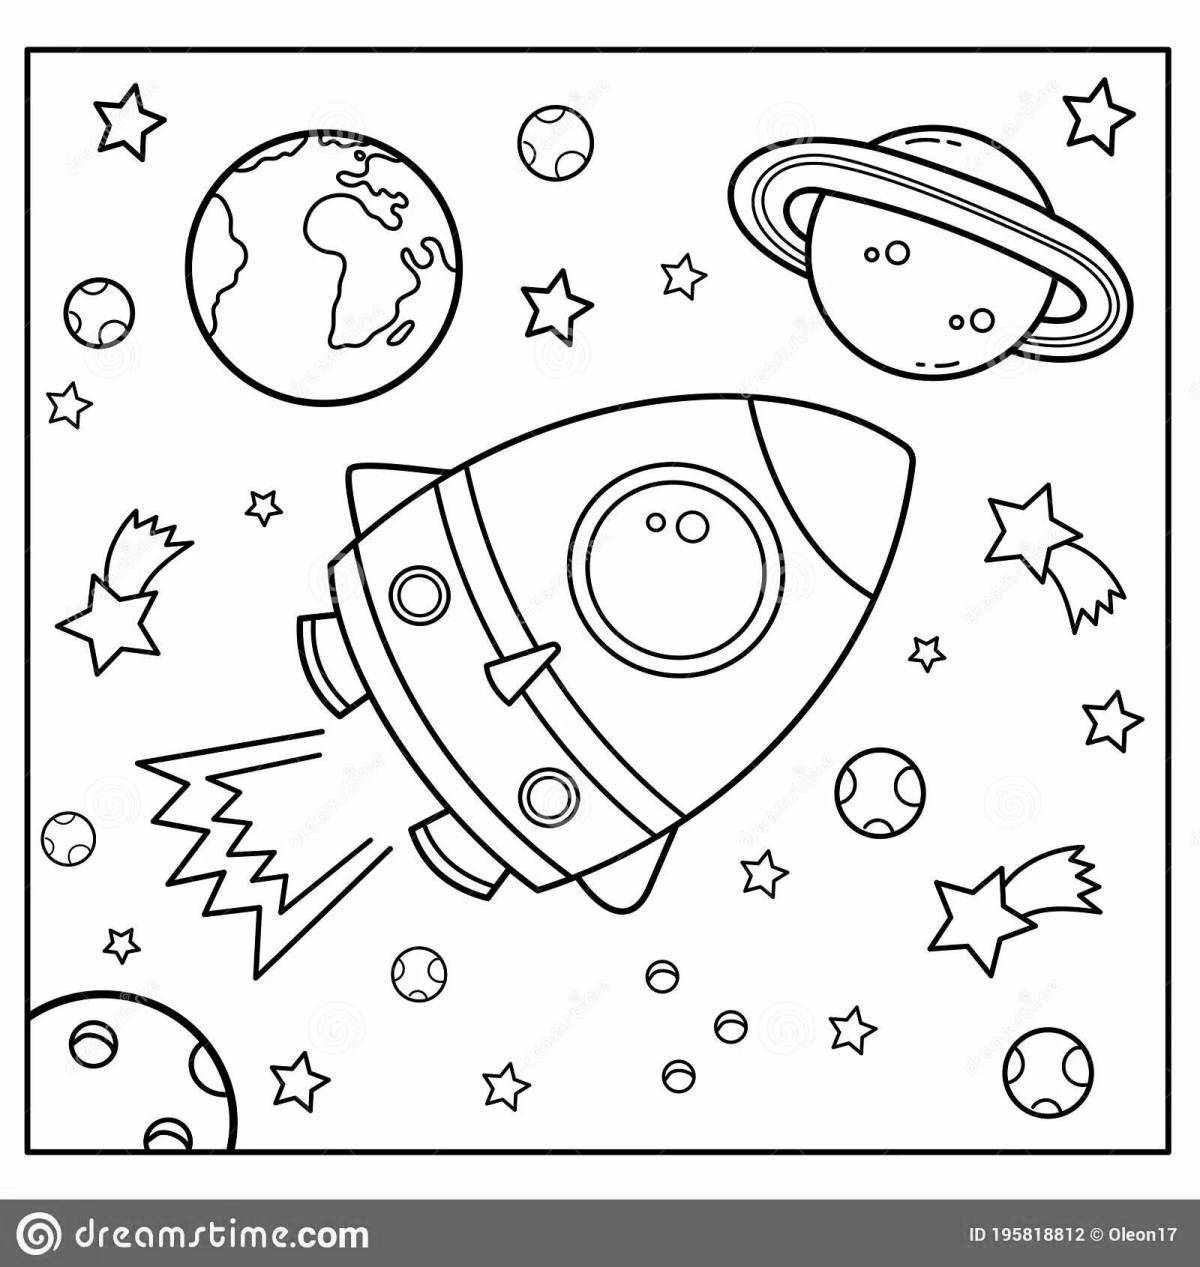 Glowing space coloring book for children 3-4 years old